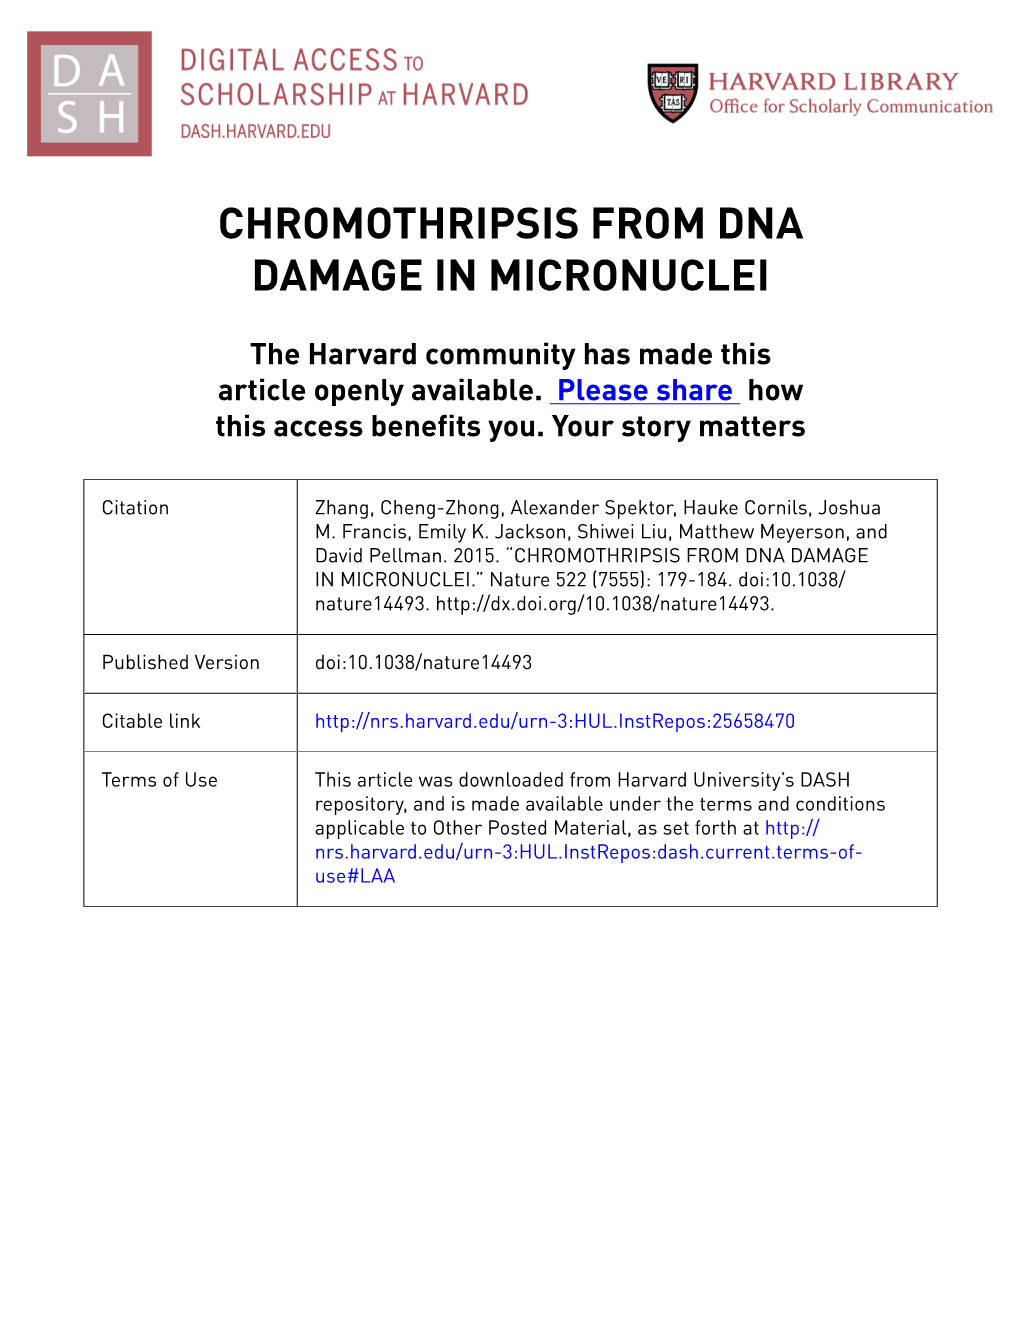 Chromothripsis from Dna Damage in Micronuclei